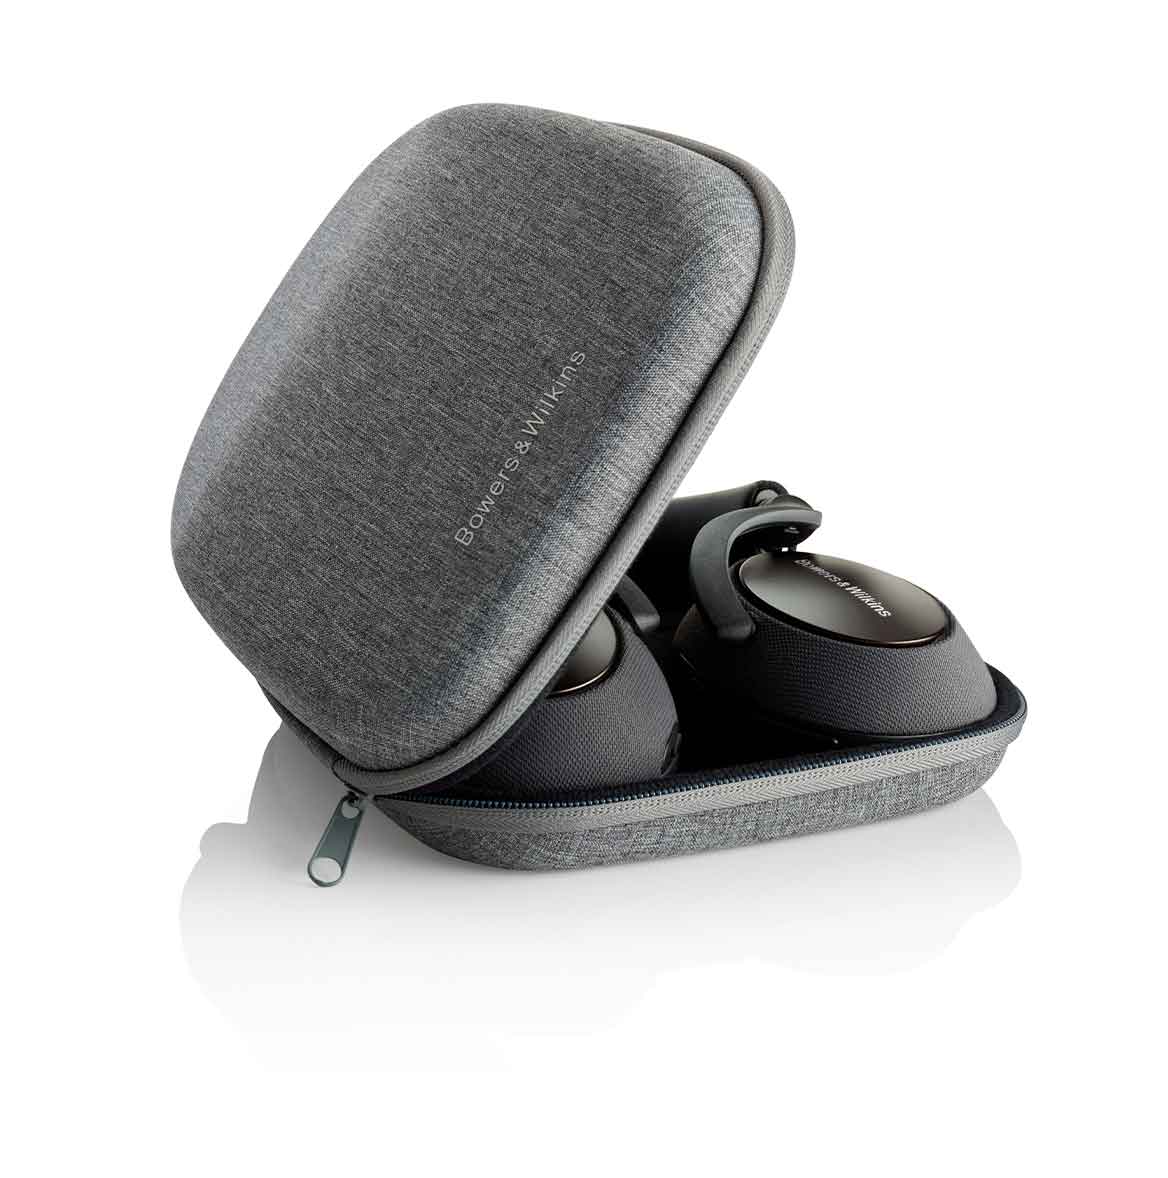 image of travel friendly case to protect and transport headphones and portable headsets.